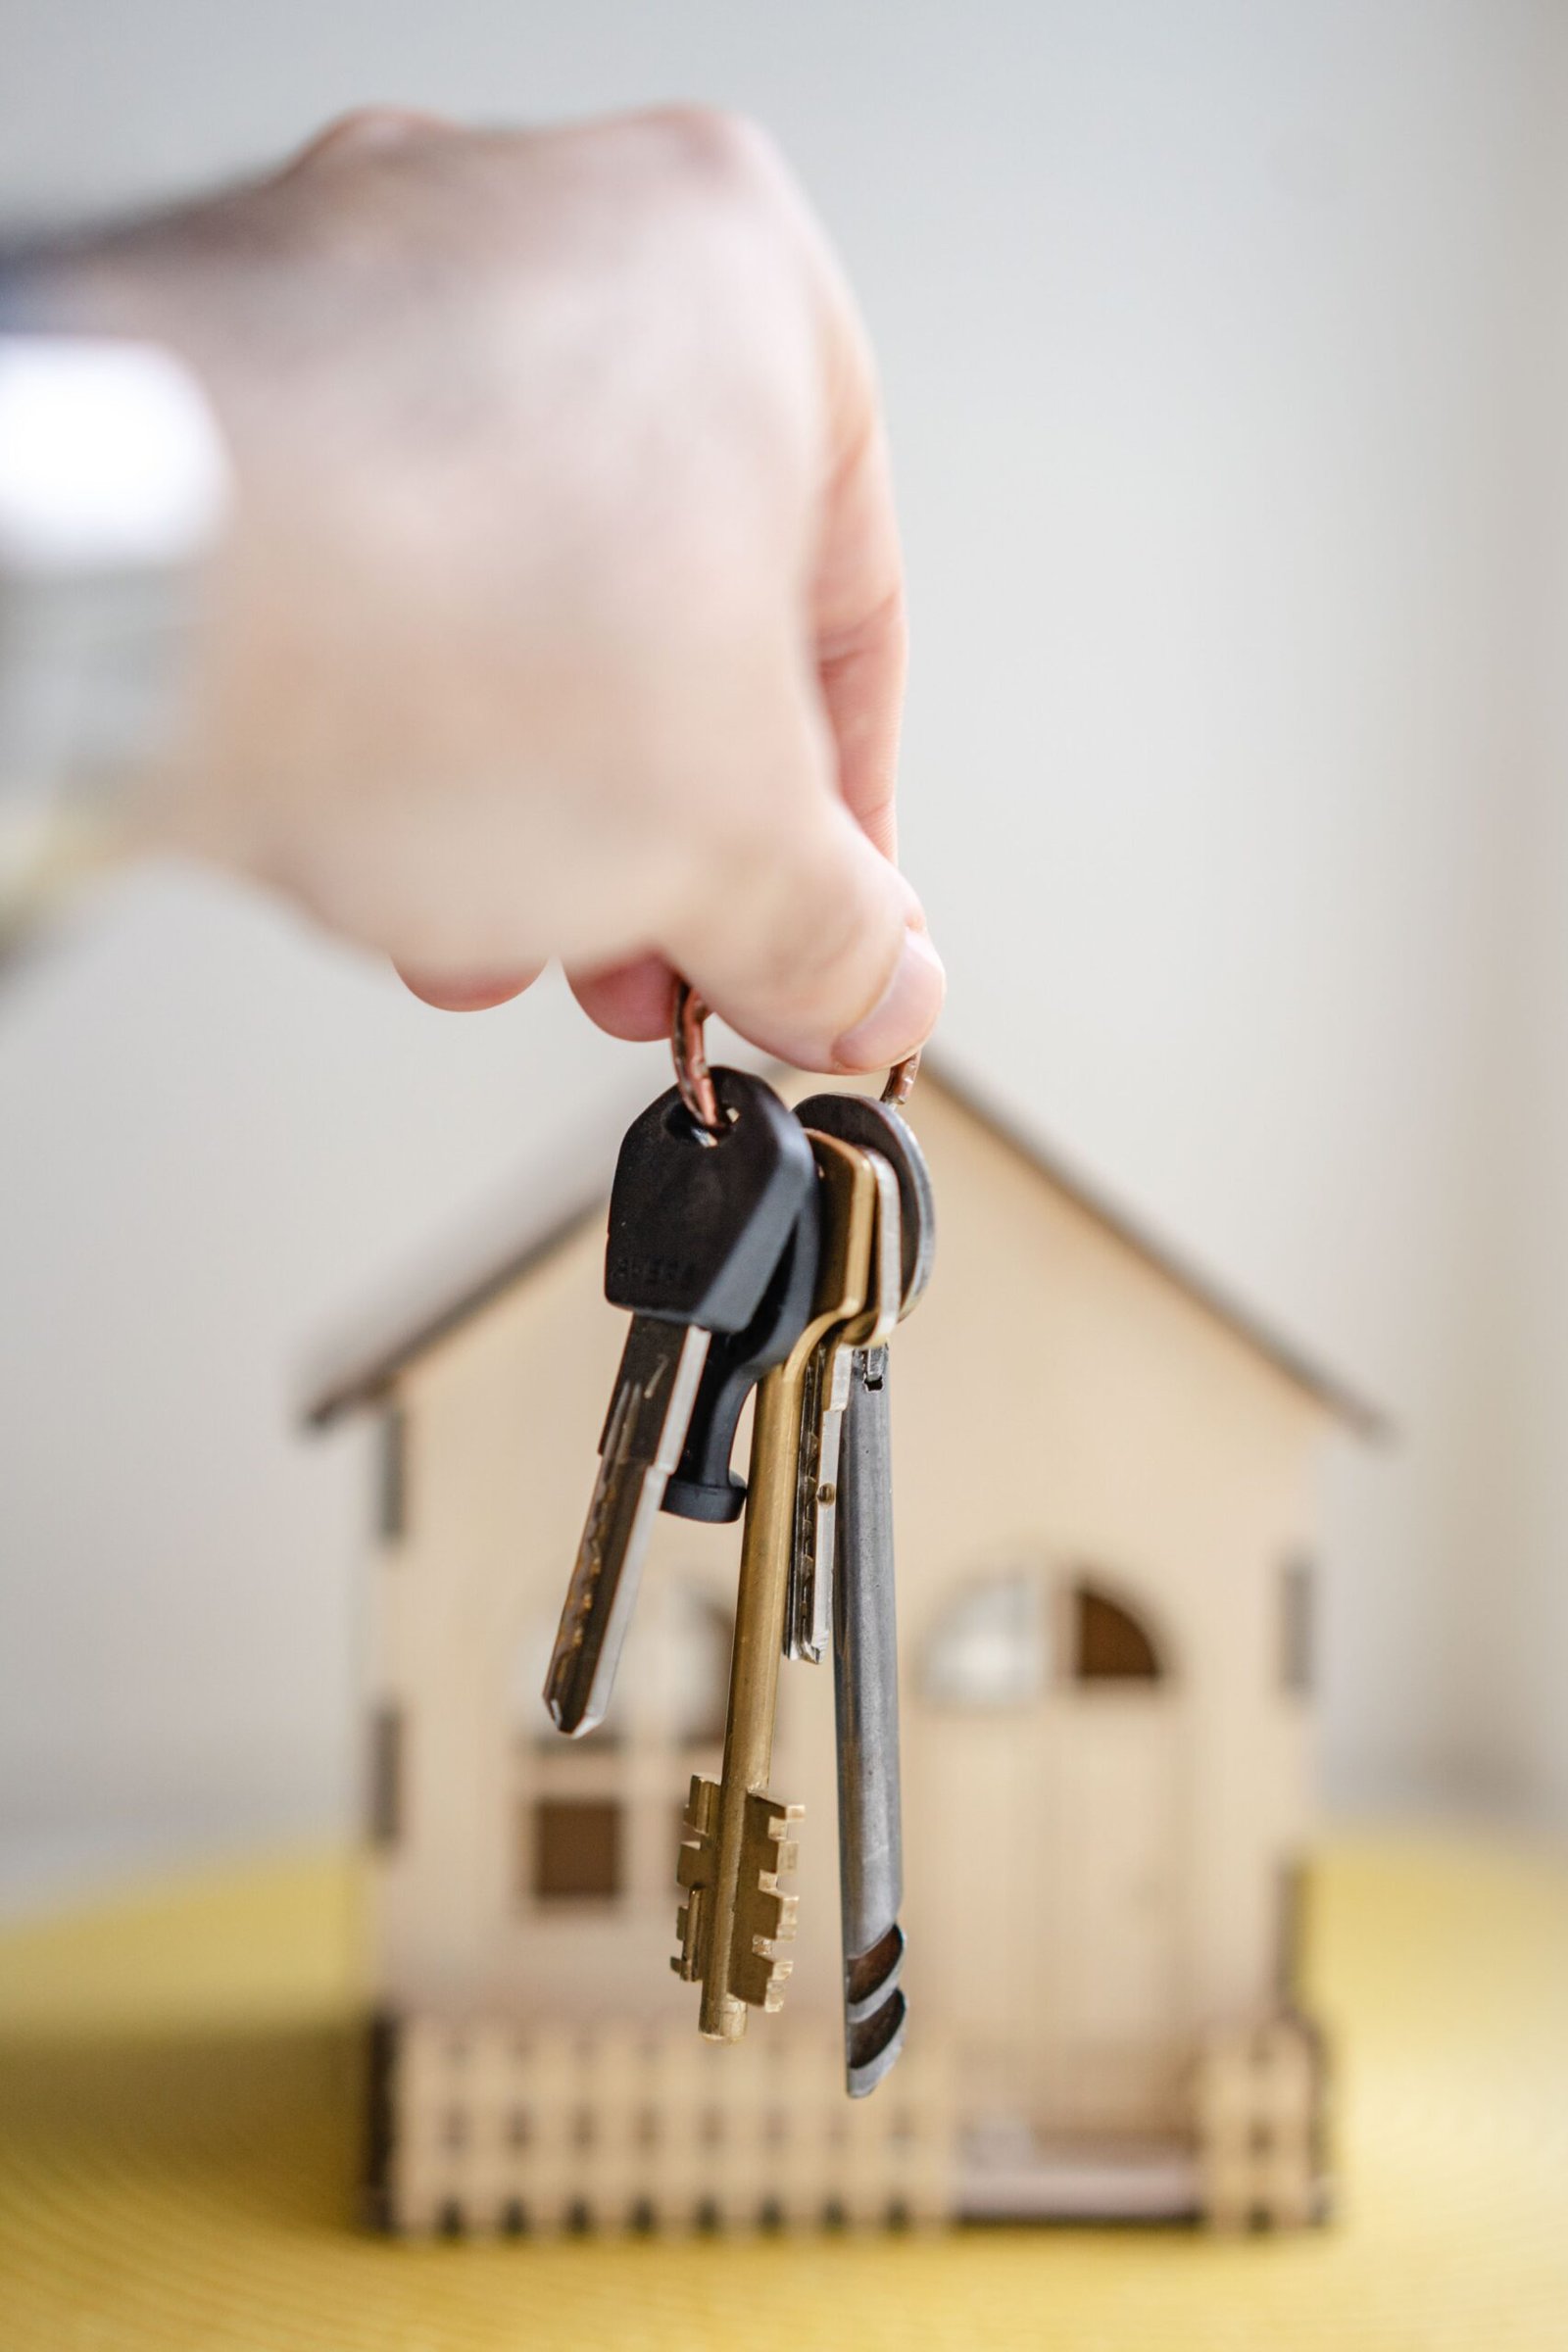 Keys being held in front of a model house symbolizing mortgages